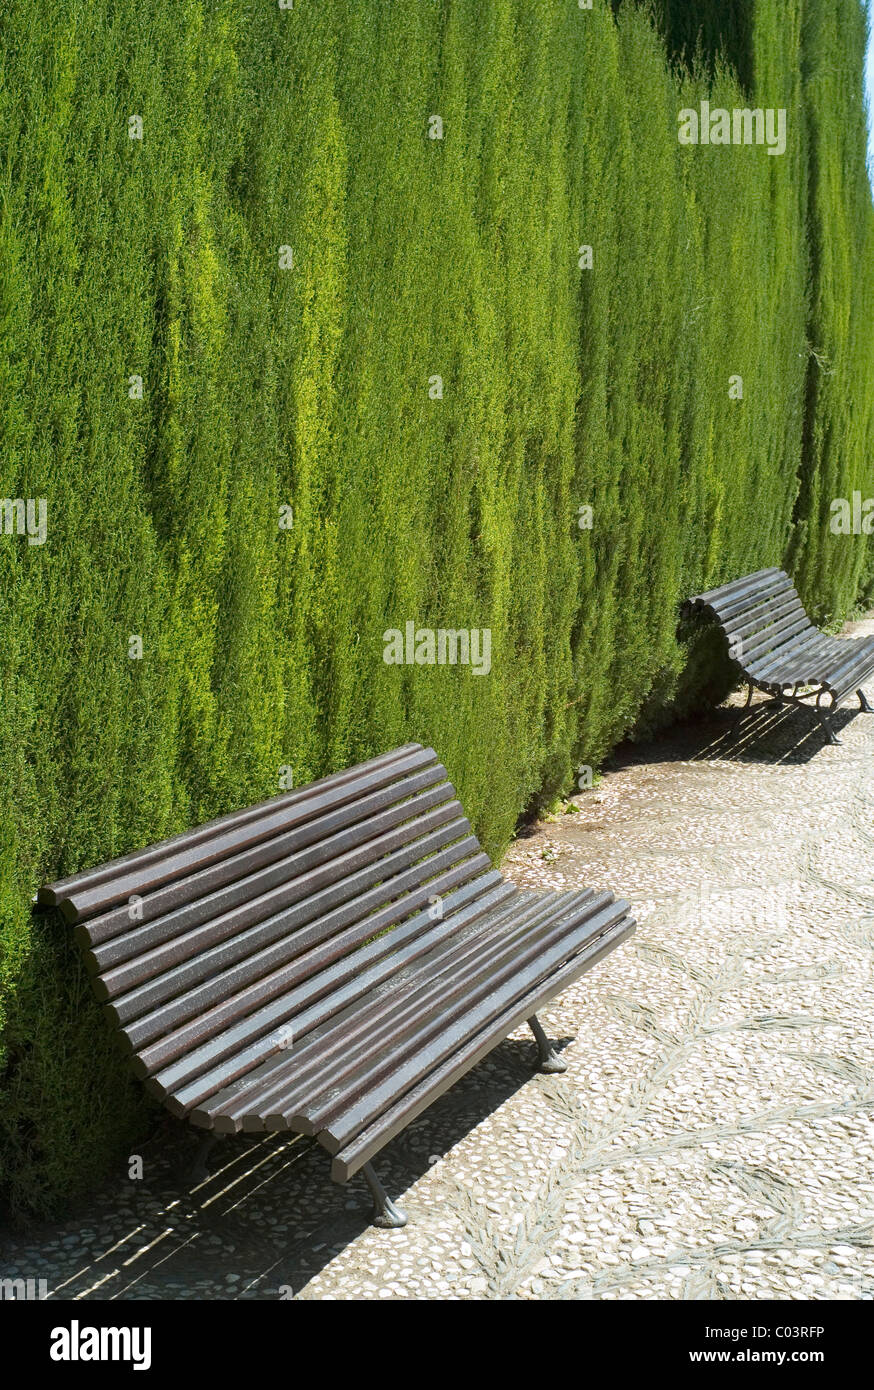 Benches and trimmed conifer trees in the garden of Alhambra Palace, Granada Stock Photo